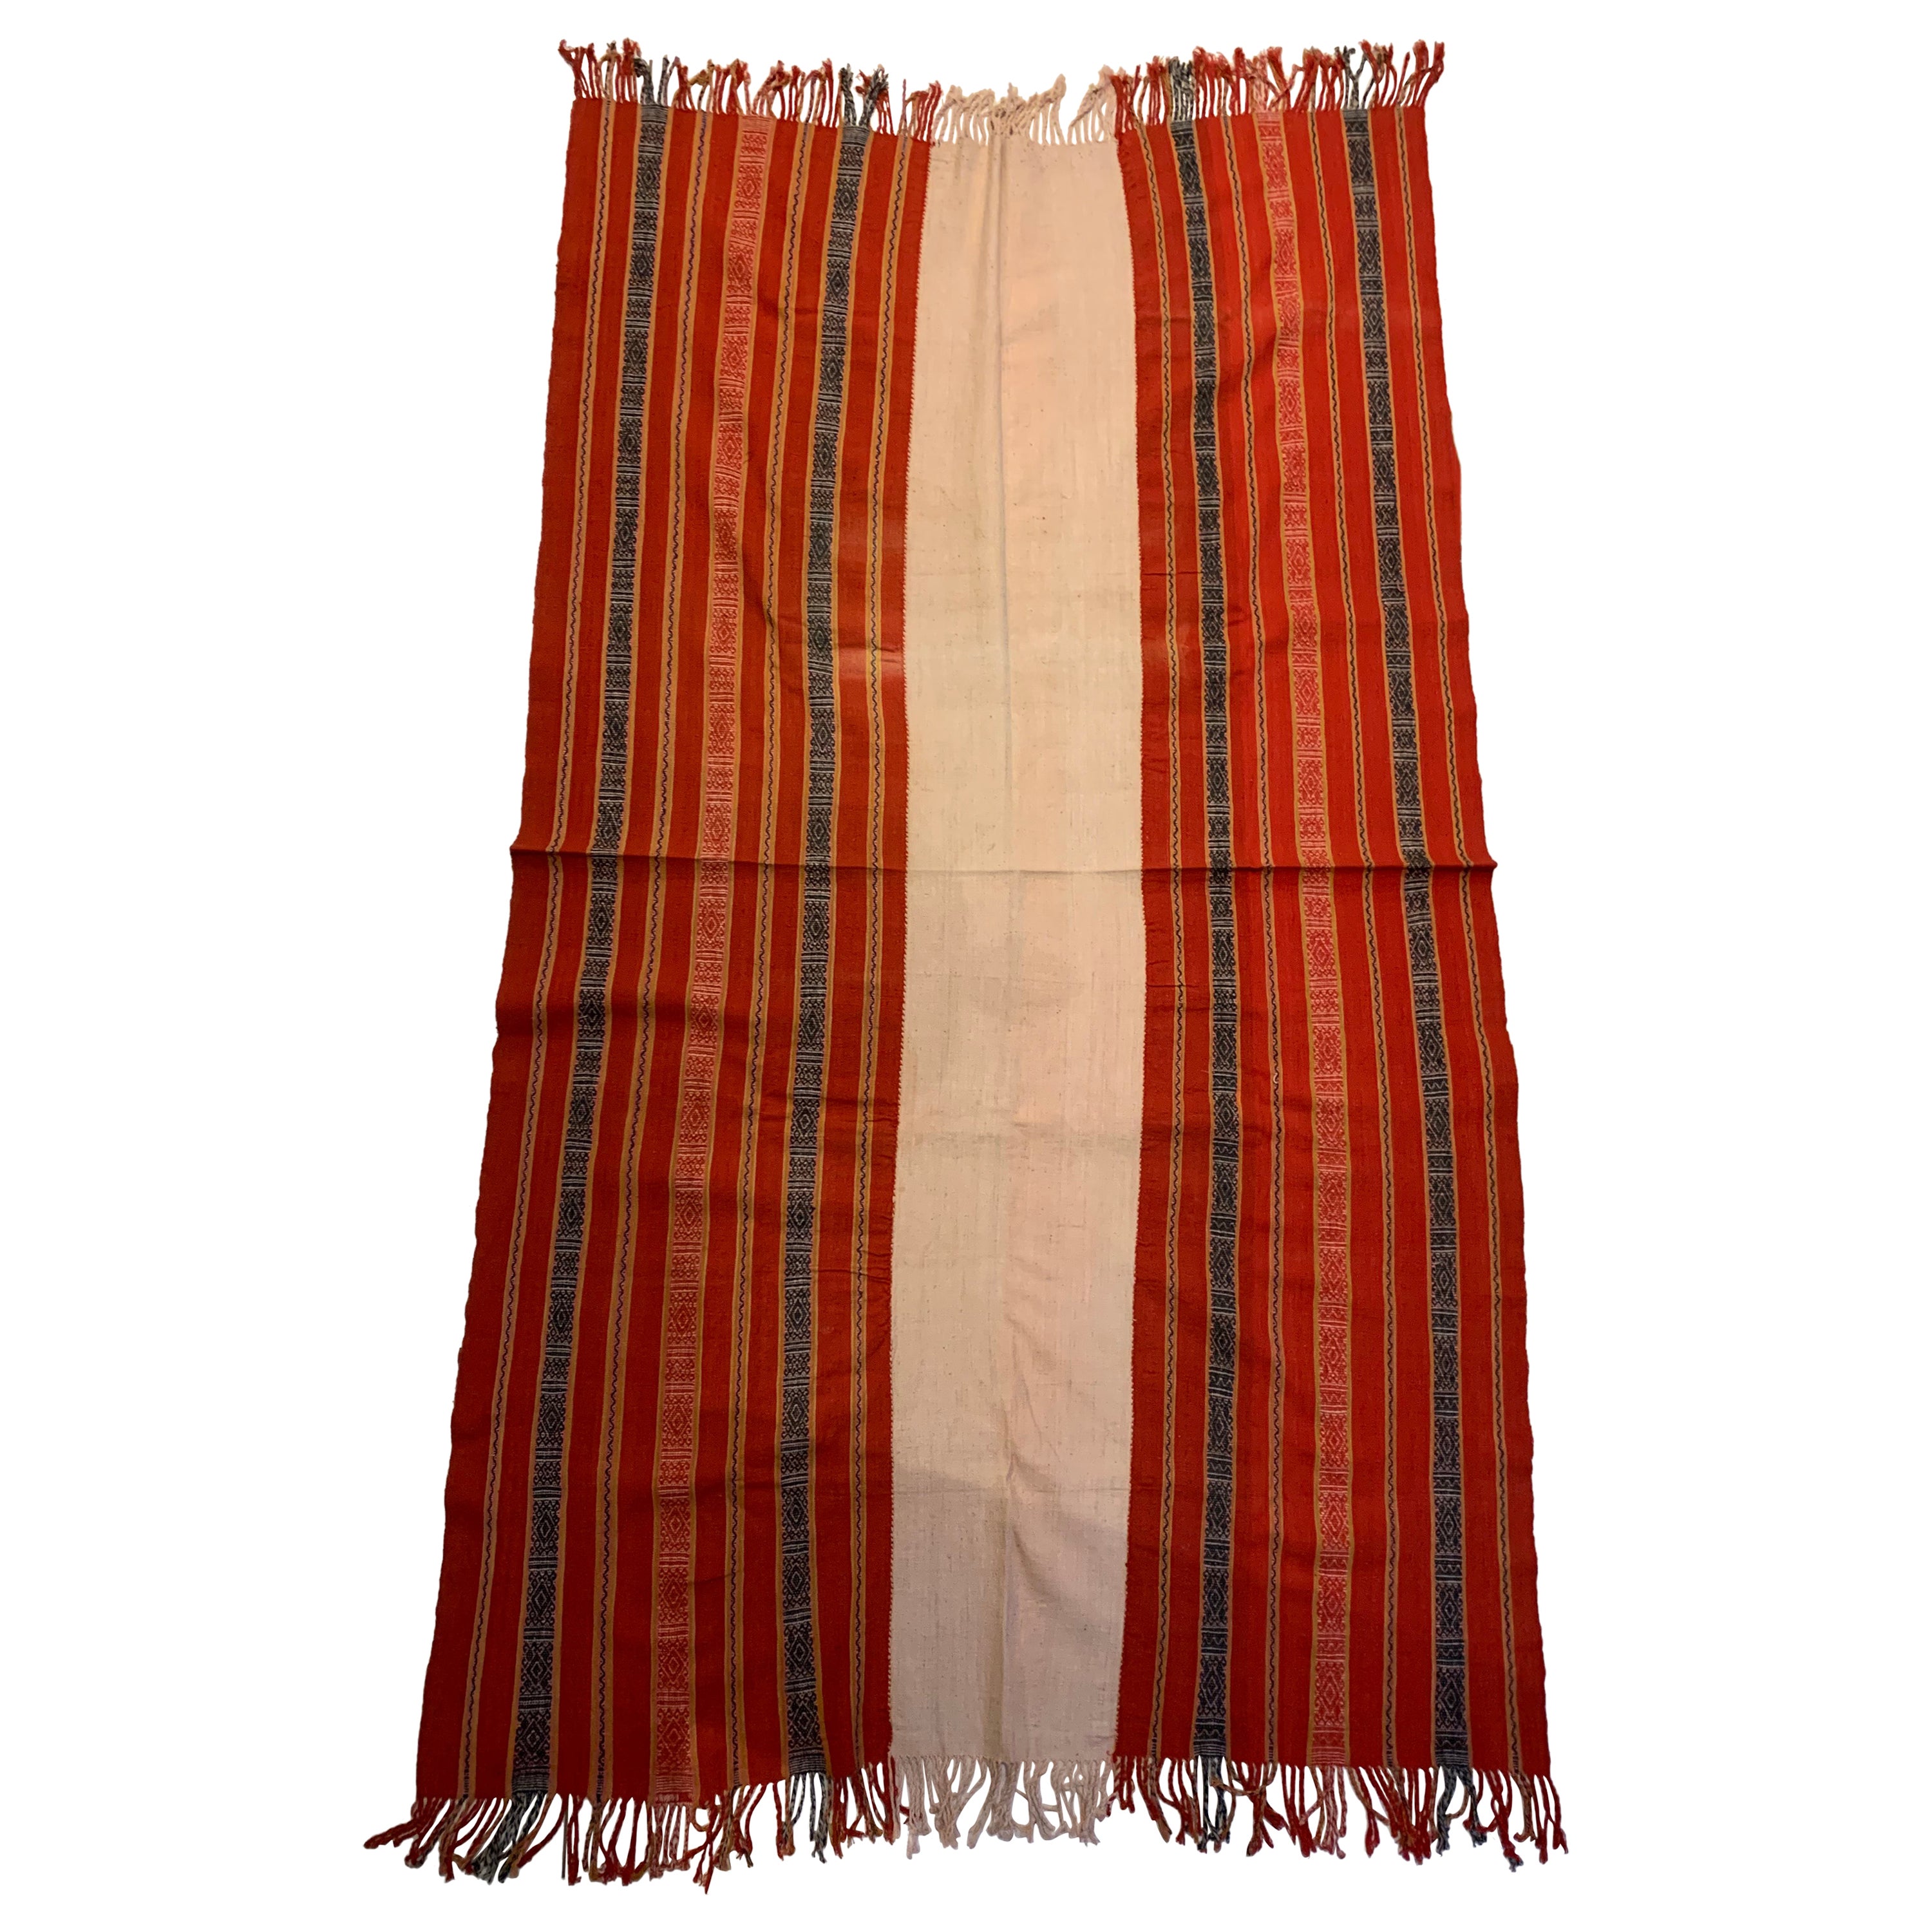 Ikat Textile from Timor Stunning Tribal Motifs & Colors, Indonesia c. 1950 For Sale